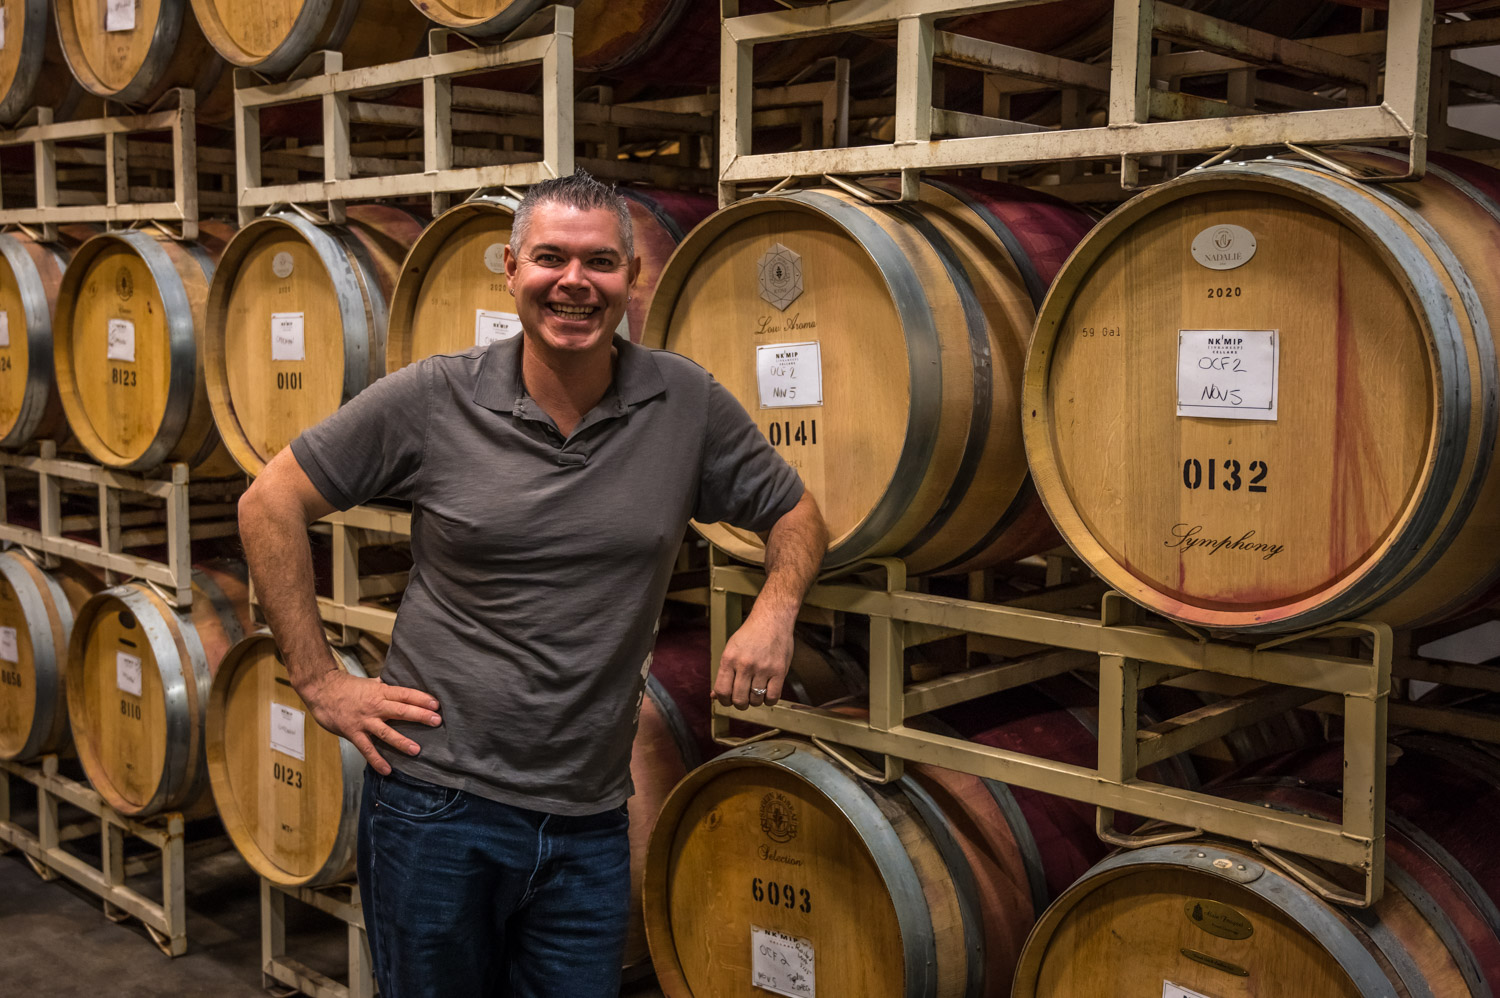 From cellar worker to Estate Winemaker, Justin Hall has grown with Nk’Mip Cellars